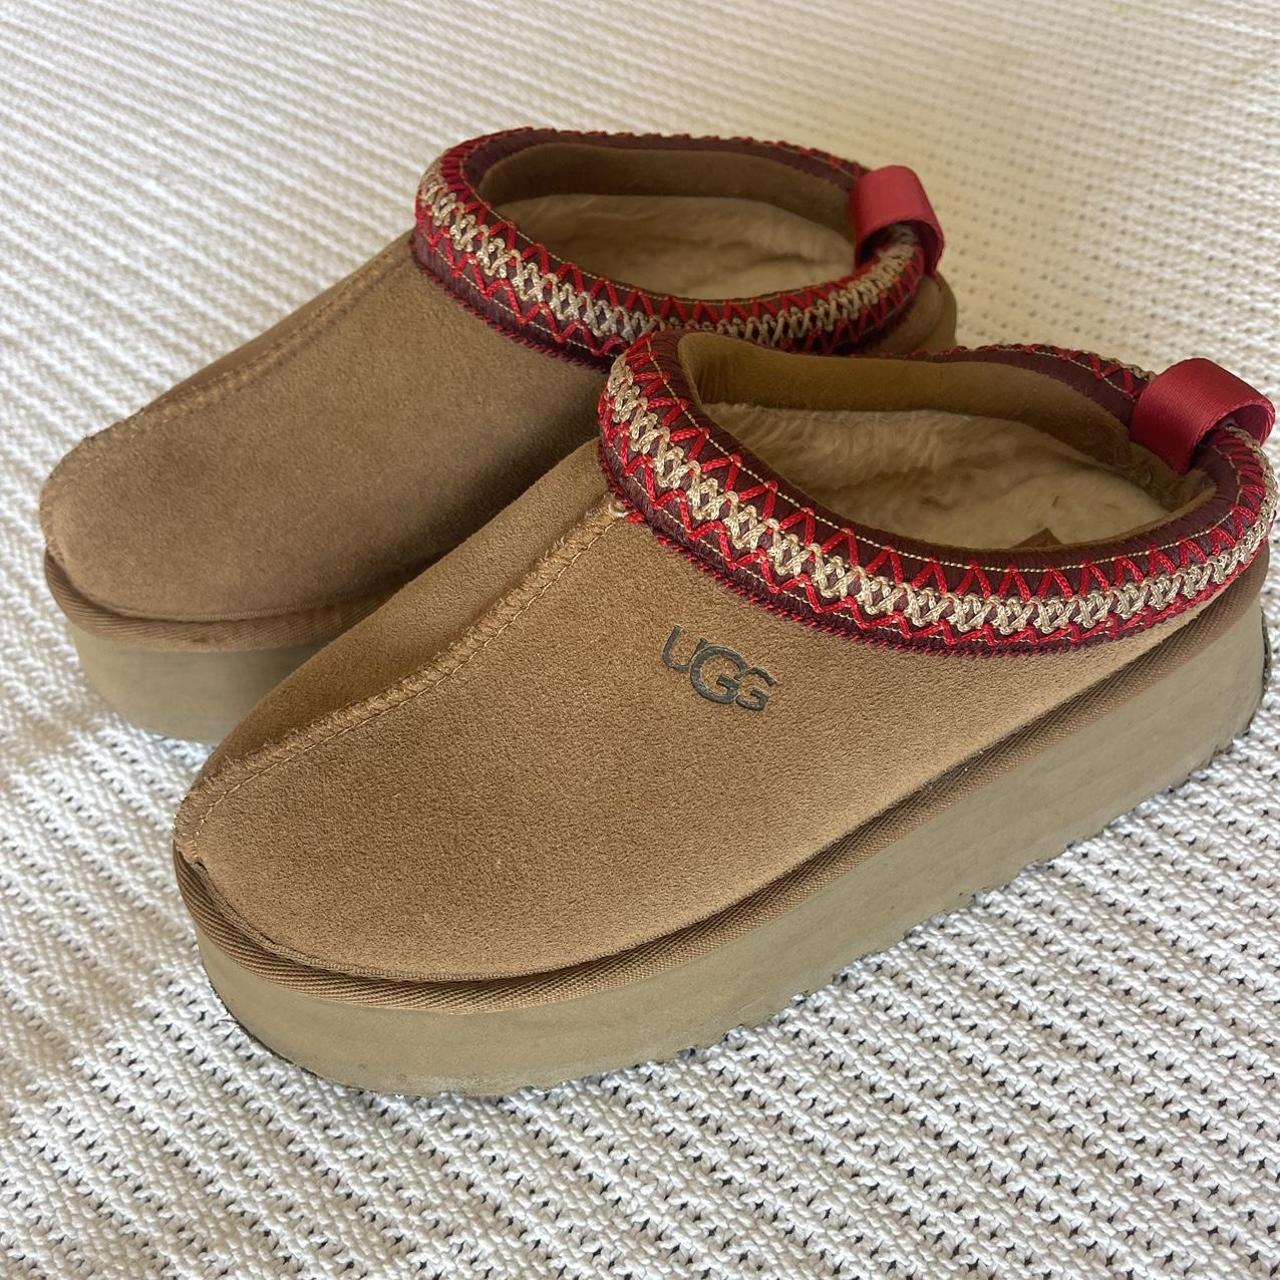 Ugg tazz platform slippers in chestnut. These are in... - Depop